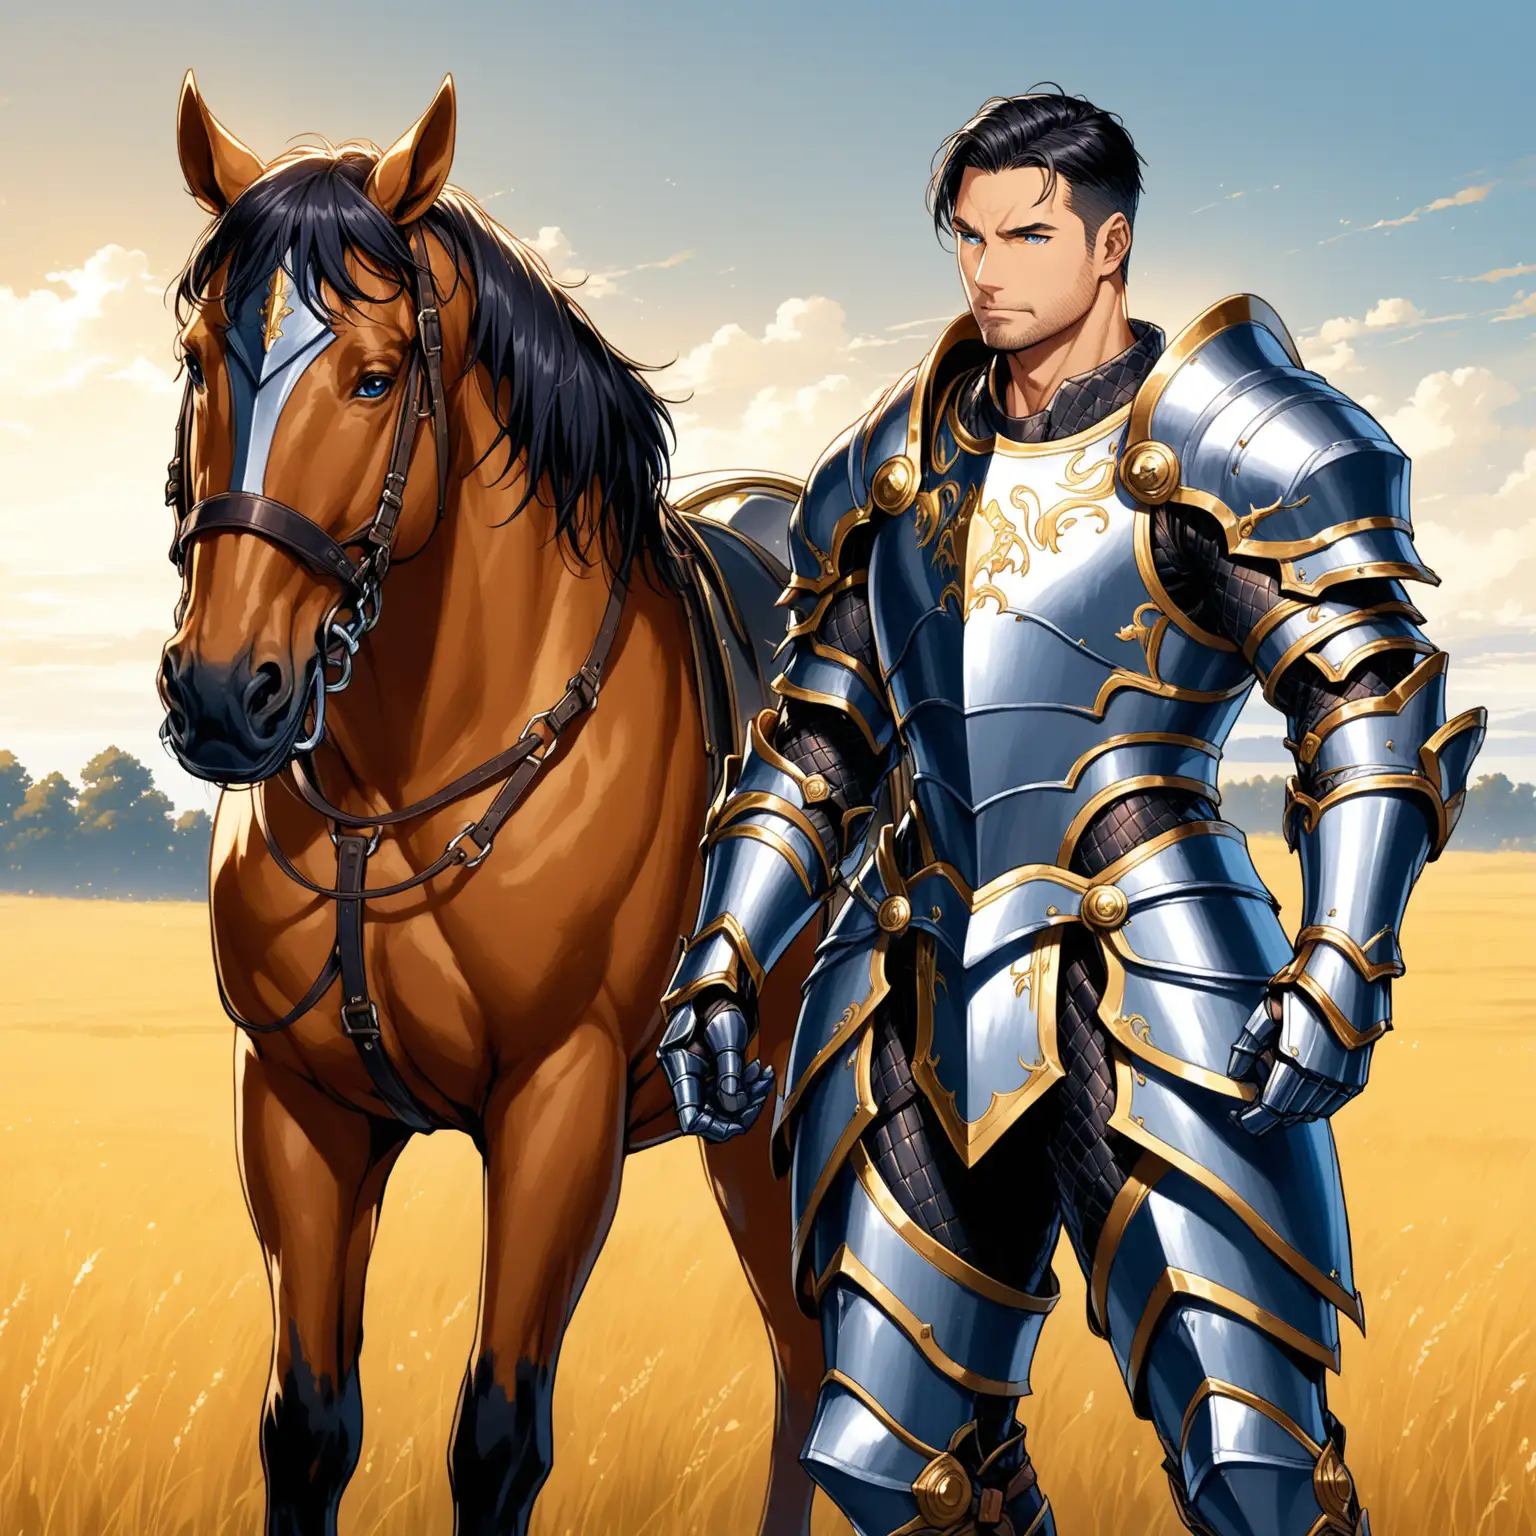 1 man. He is a paladin of Torm. He is handsome and very muscular and 40 years old. He has undercut black hair and blue eyes. He is wearing steel knight armor with royal blue and gold trim. He is standing in a field petting a brown warhorse. He is not wearing a helmet. He has an calm expression.